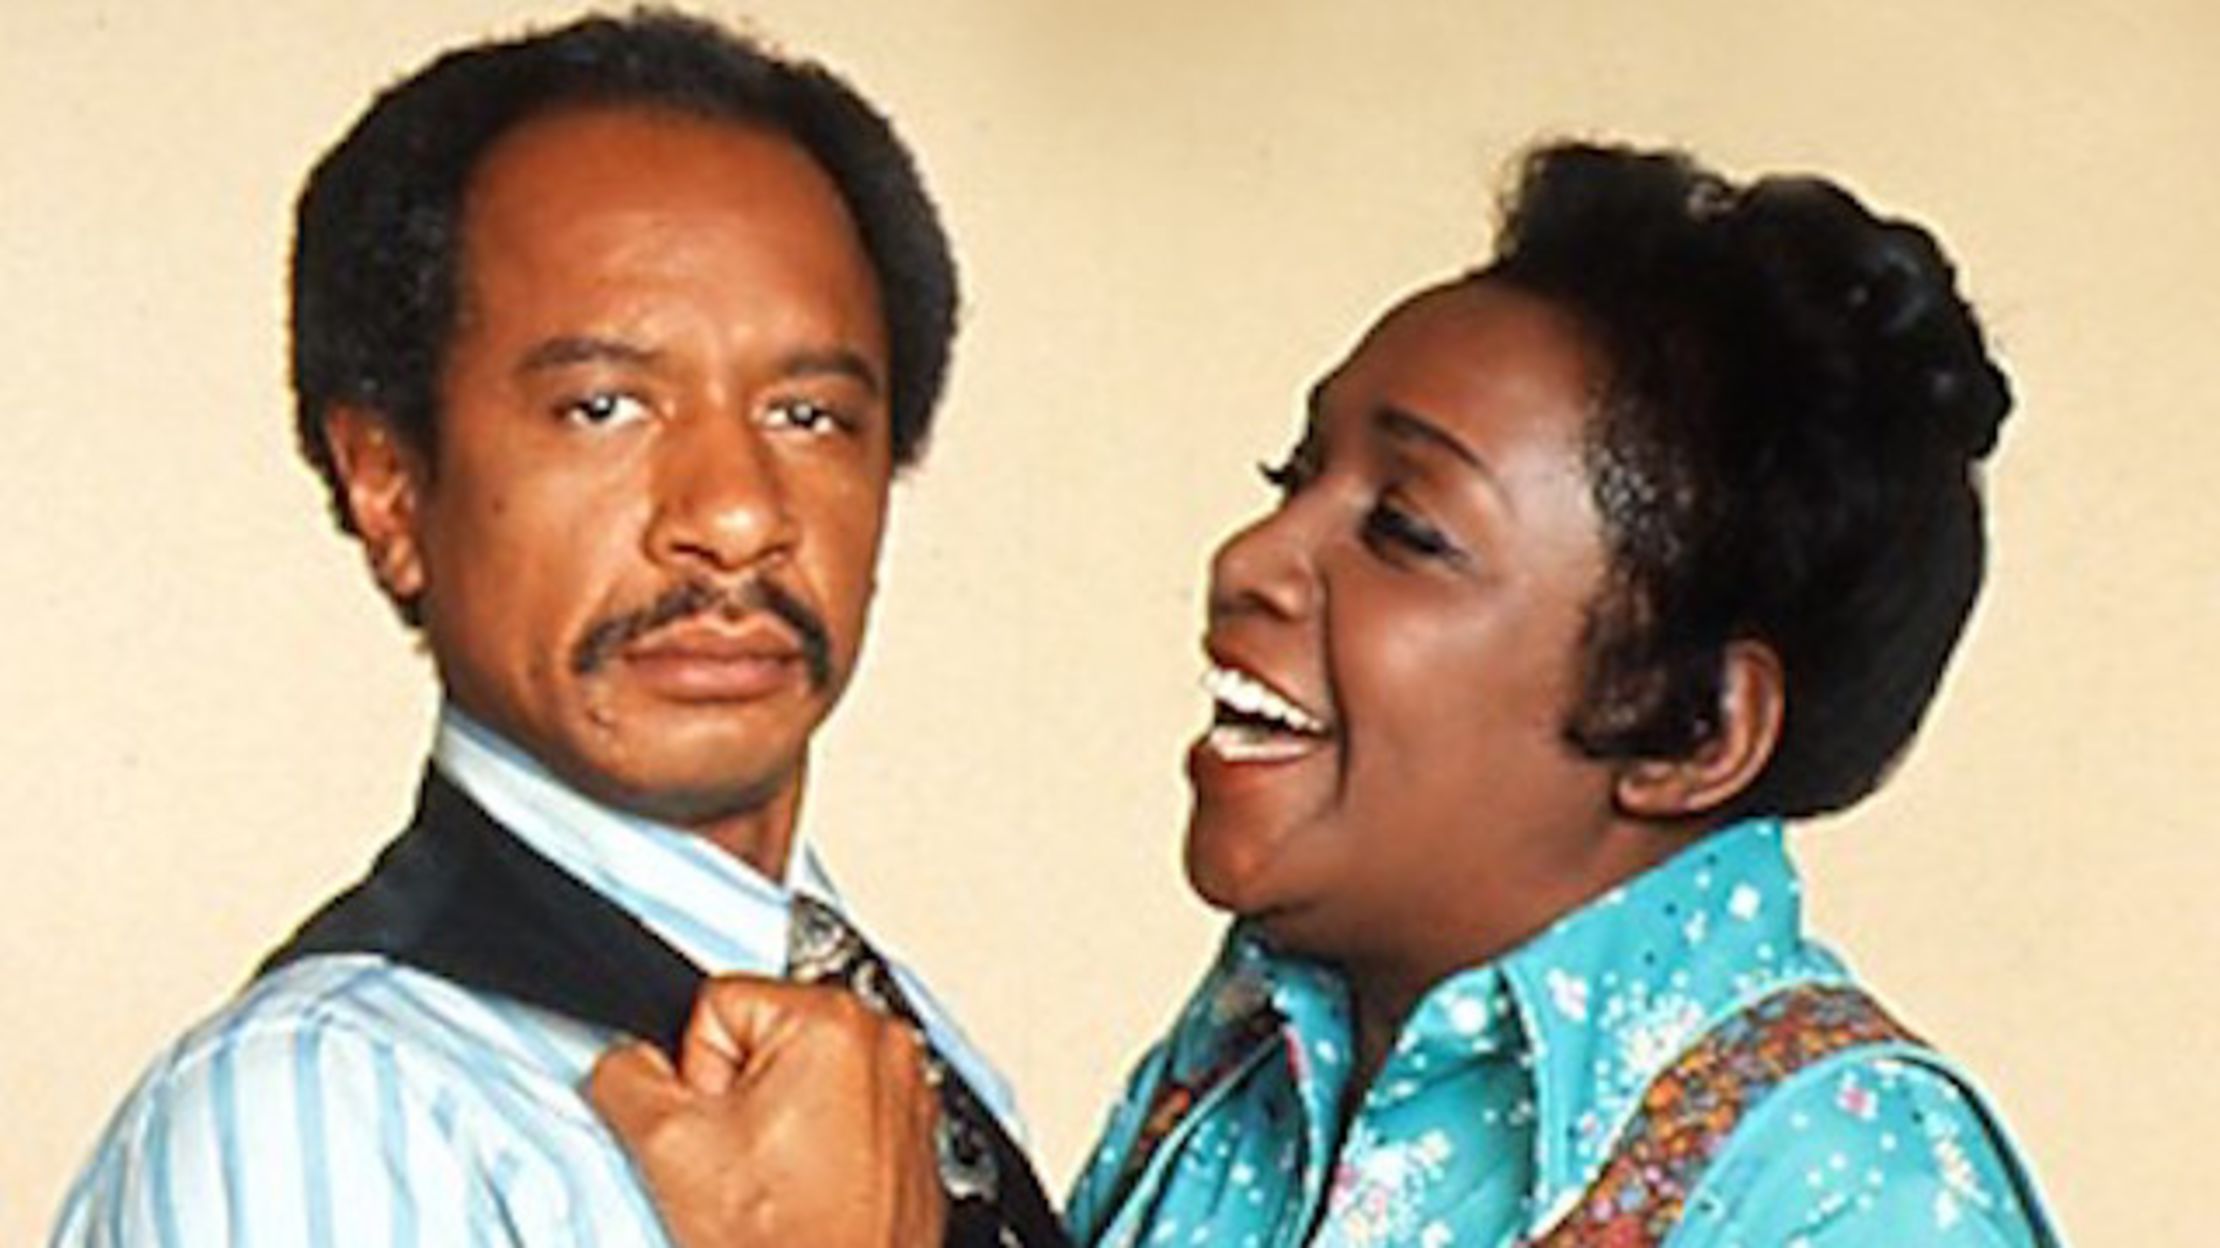 11 Deluxe Facts About The Jeffersons Mental Floss